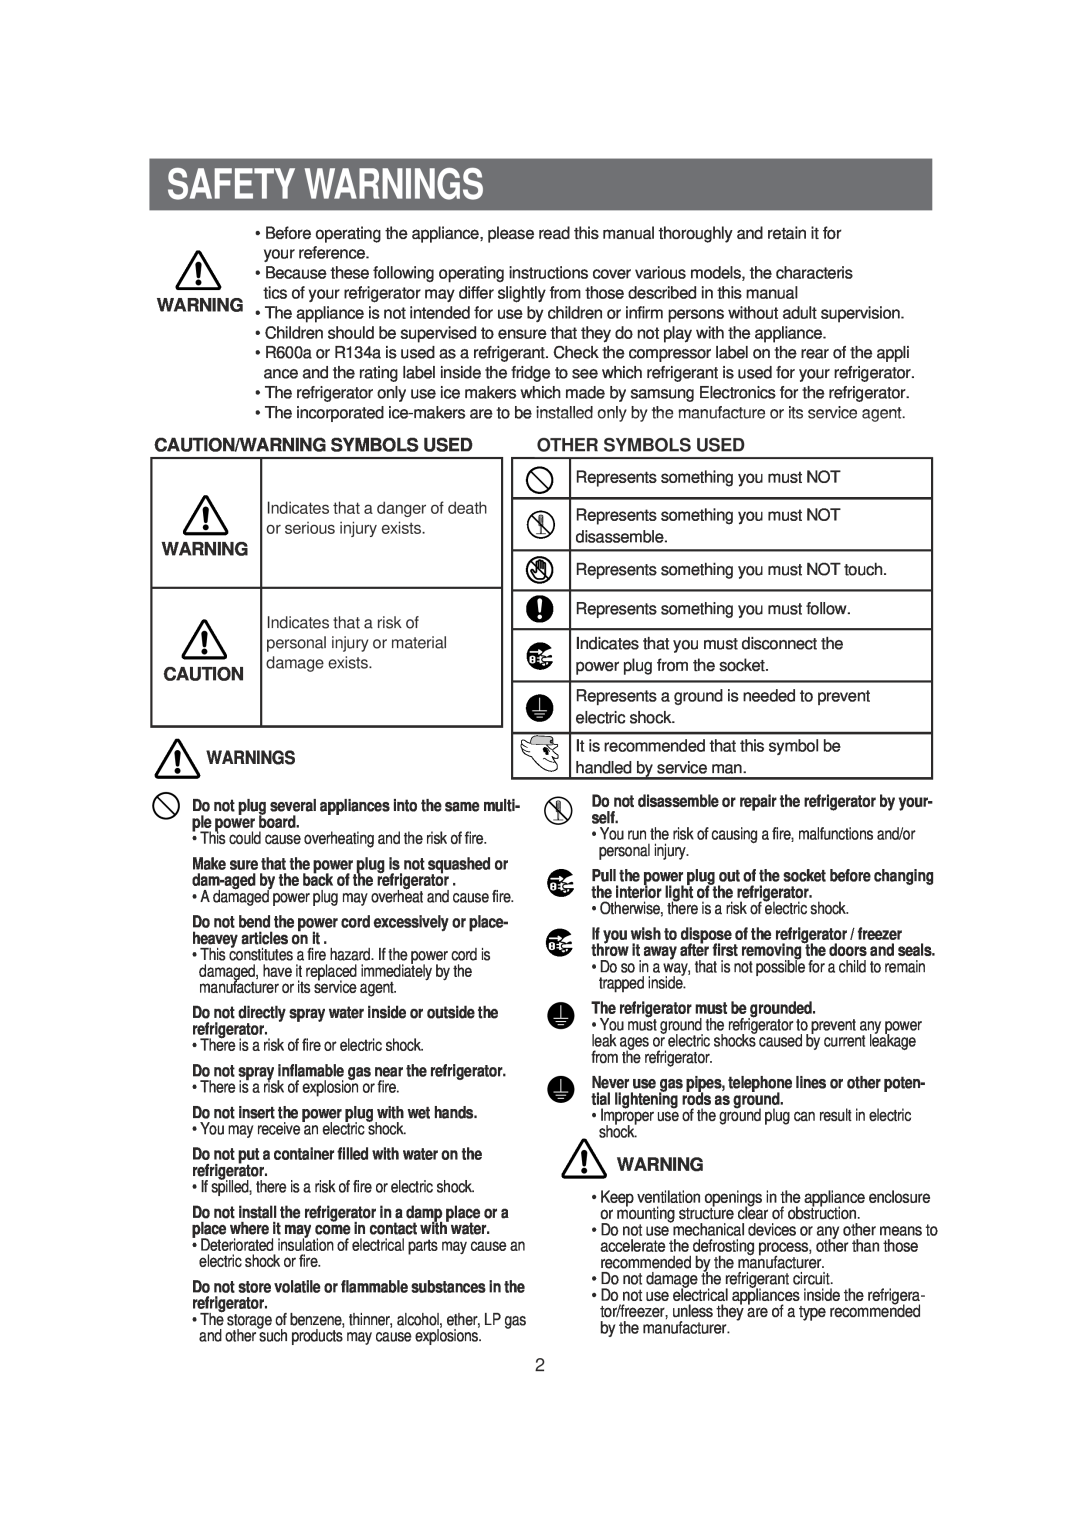 Samsung SRS620DW owner manual Safety Warnings, Caution/Warning Symbols Used, Other Symbols Used 